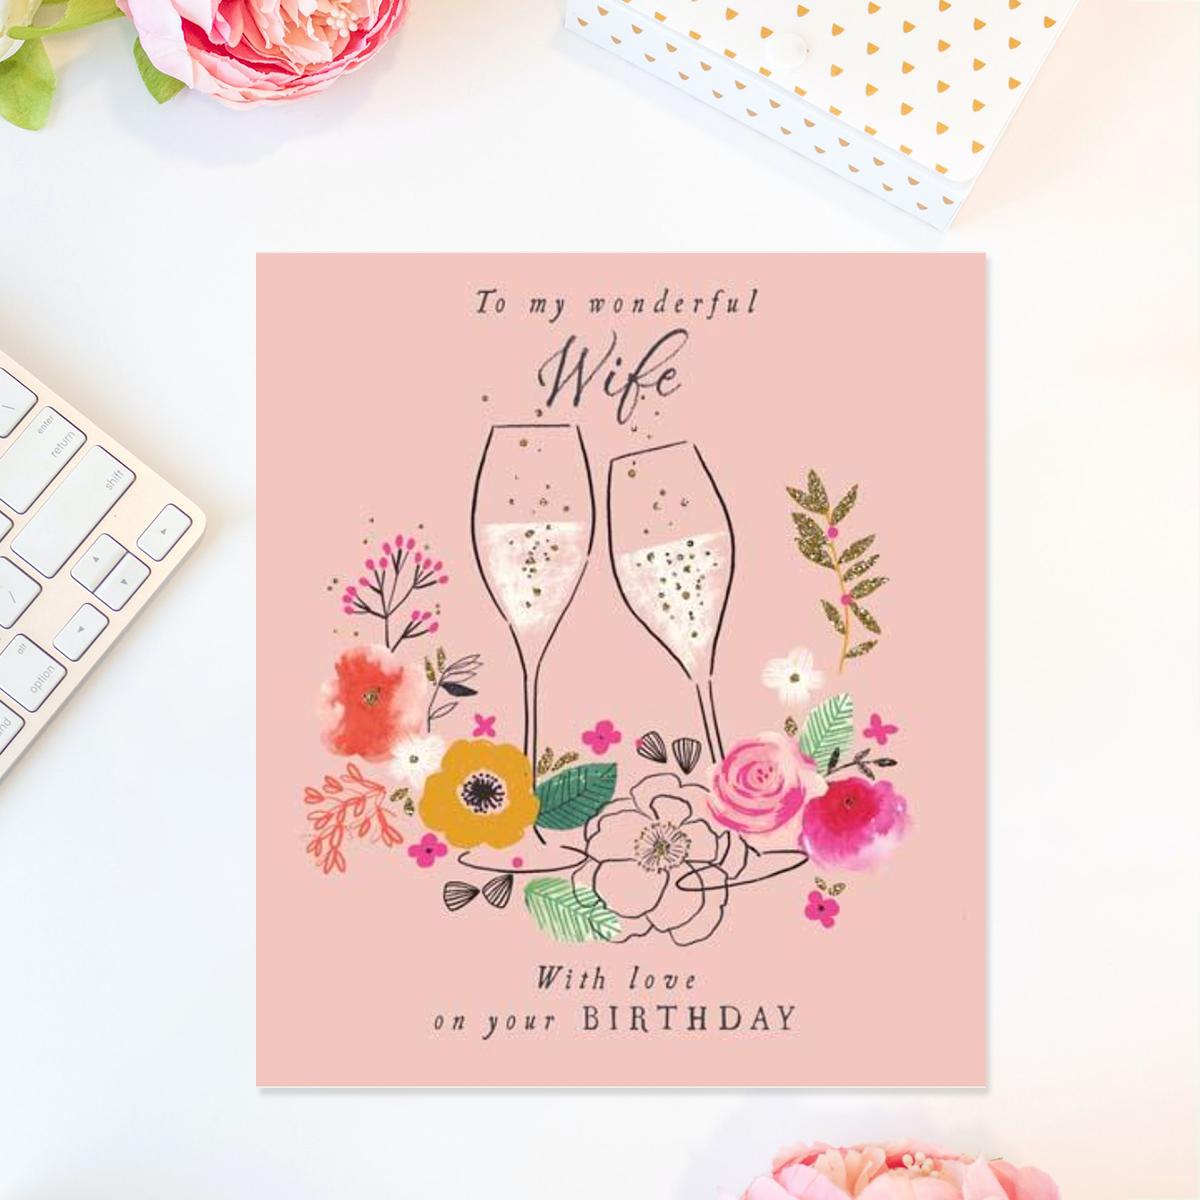 Wonderful Wife Birthday Bubbly Cards Front Image